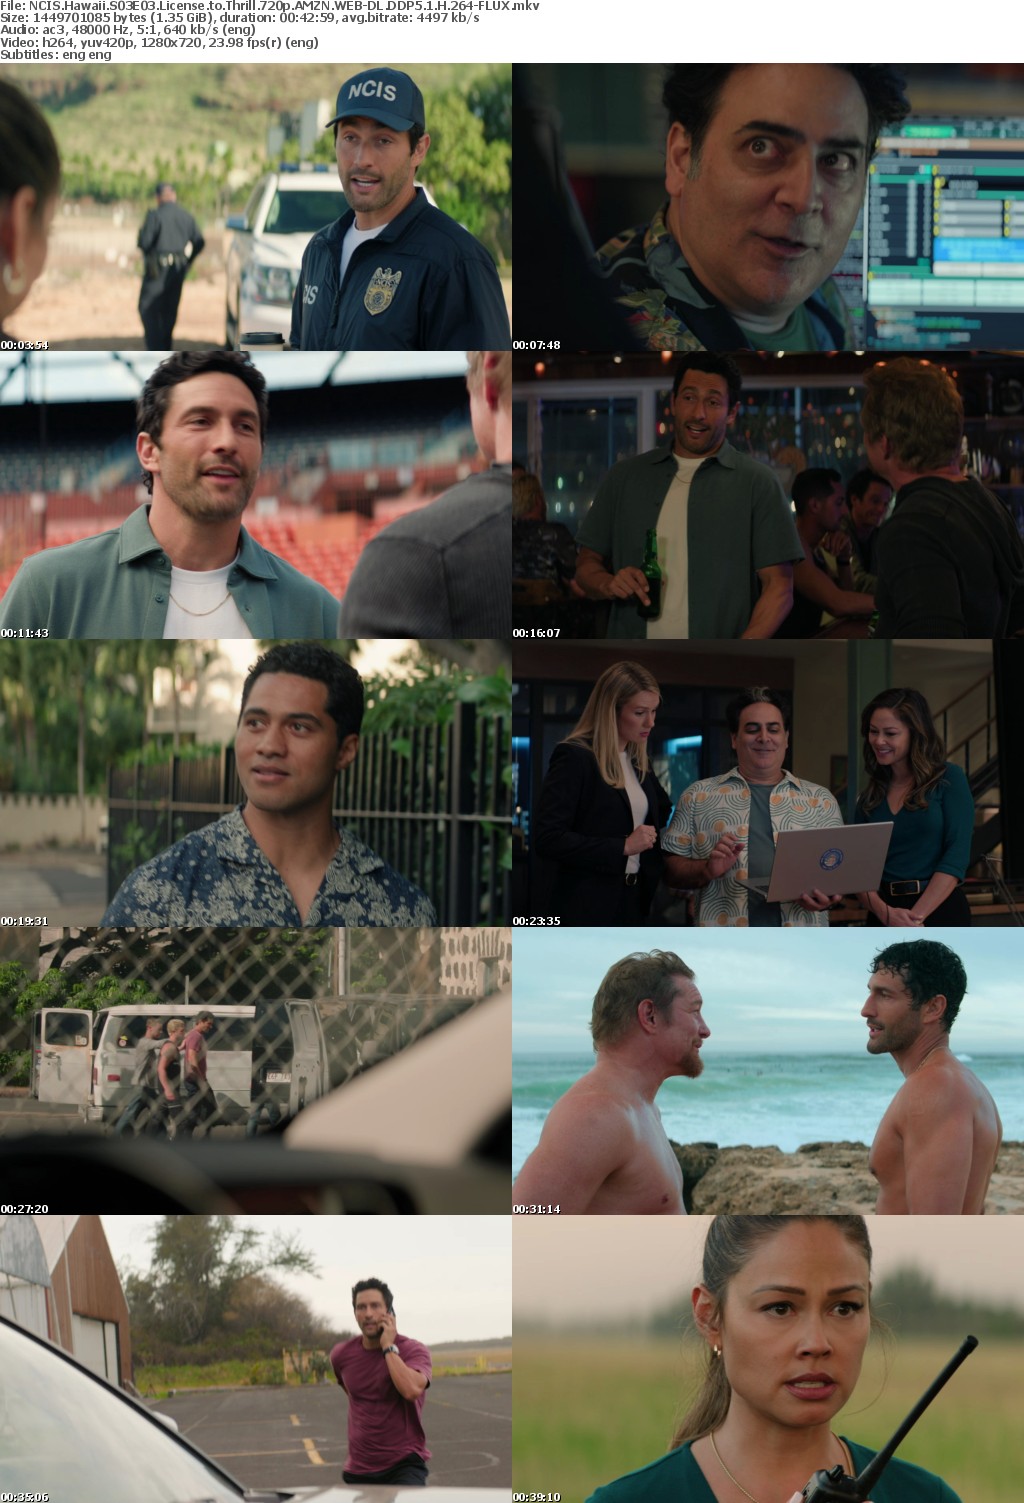 NCIS Hawaii S03E03 License to Thrill 720p AMZN WEB-DL DDP5 1 H 264-FLUX